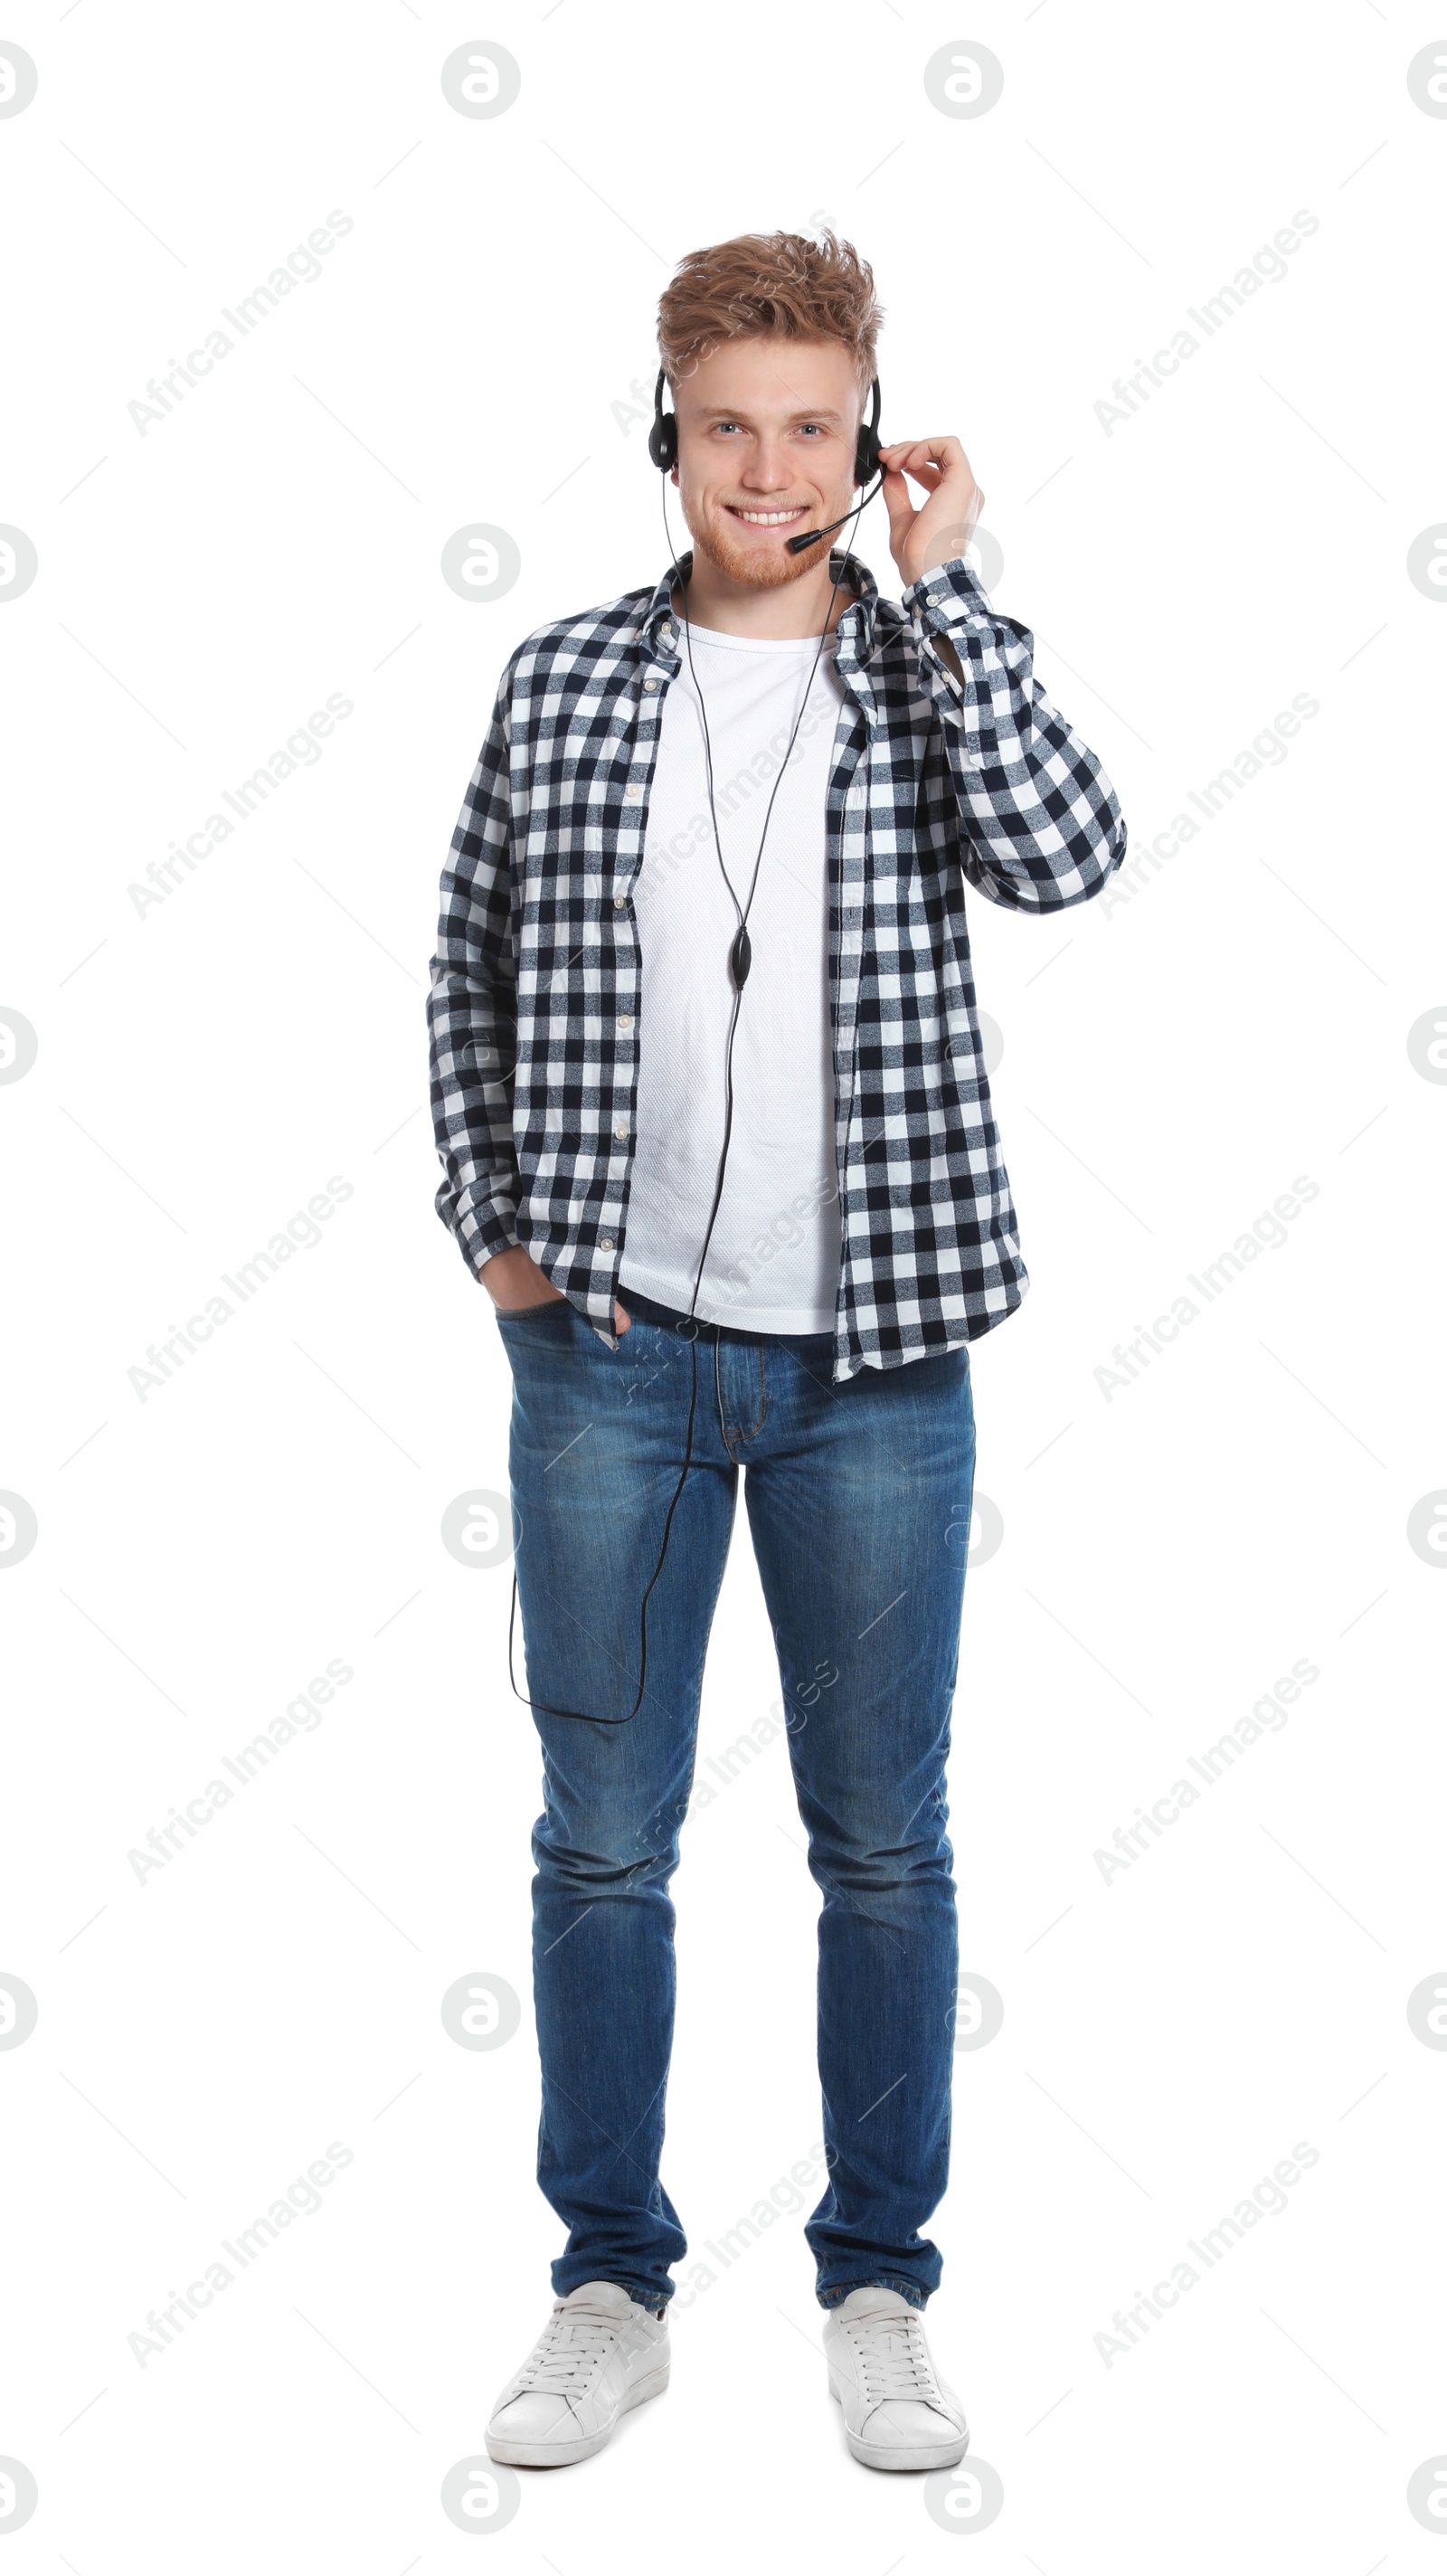 Photo of Technical support operator with headset on white background